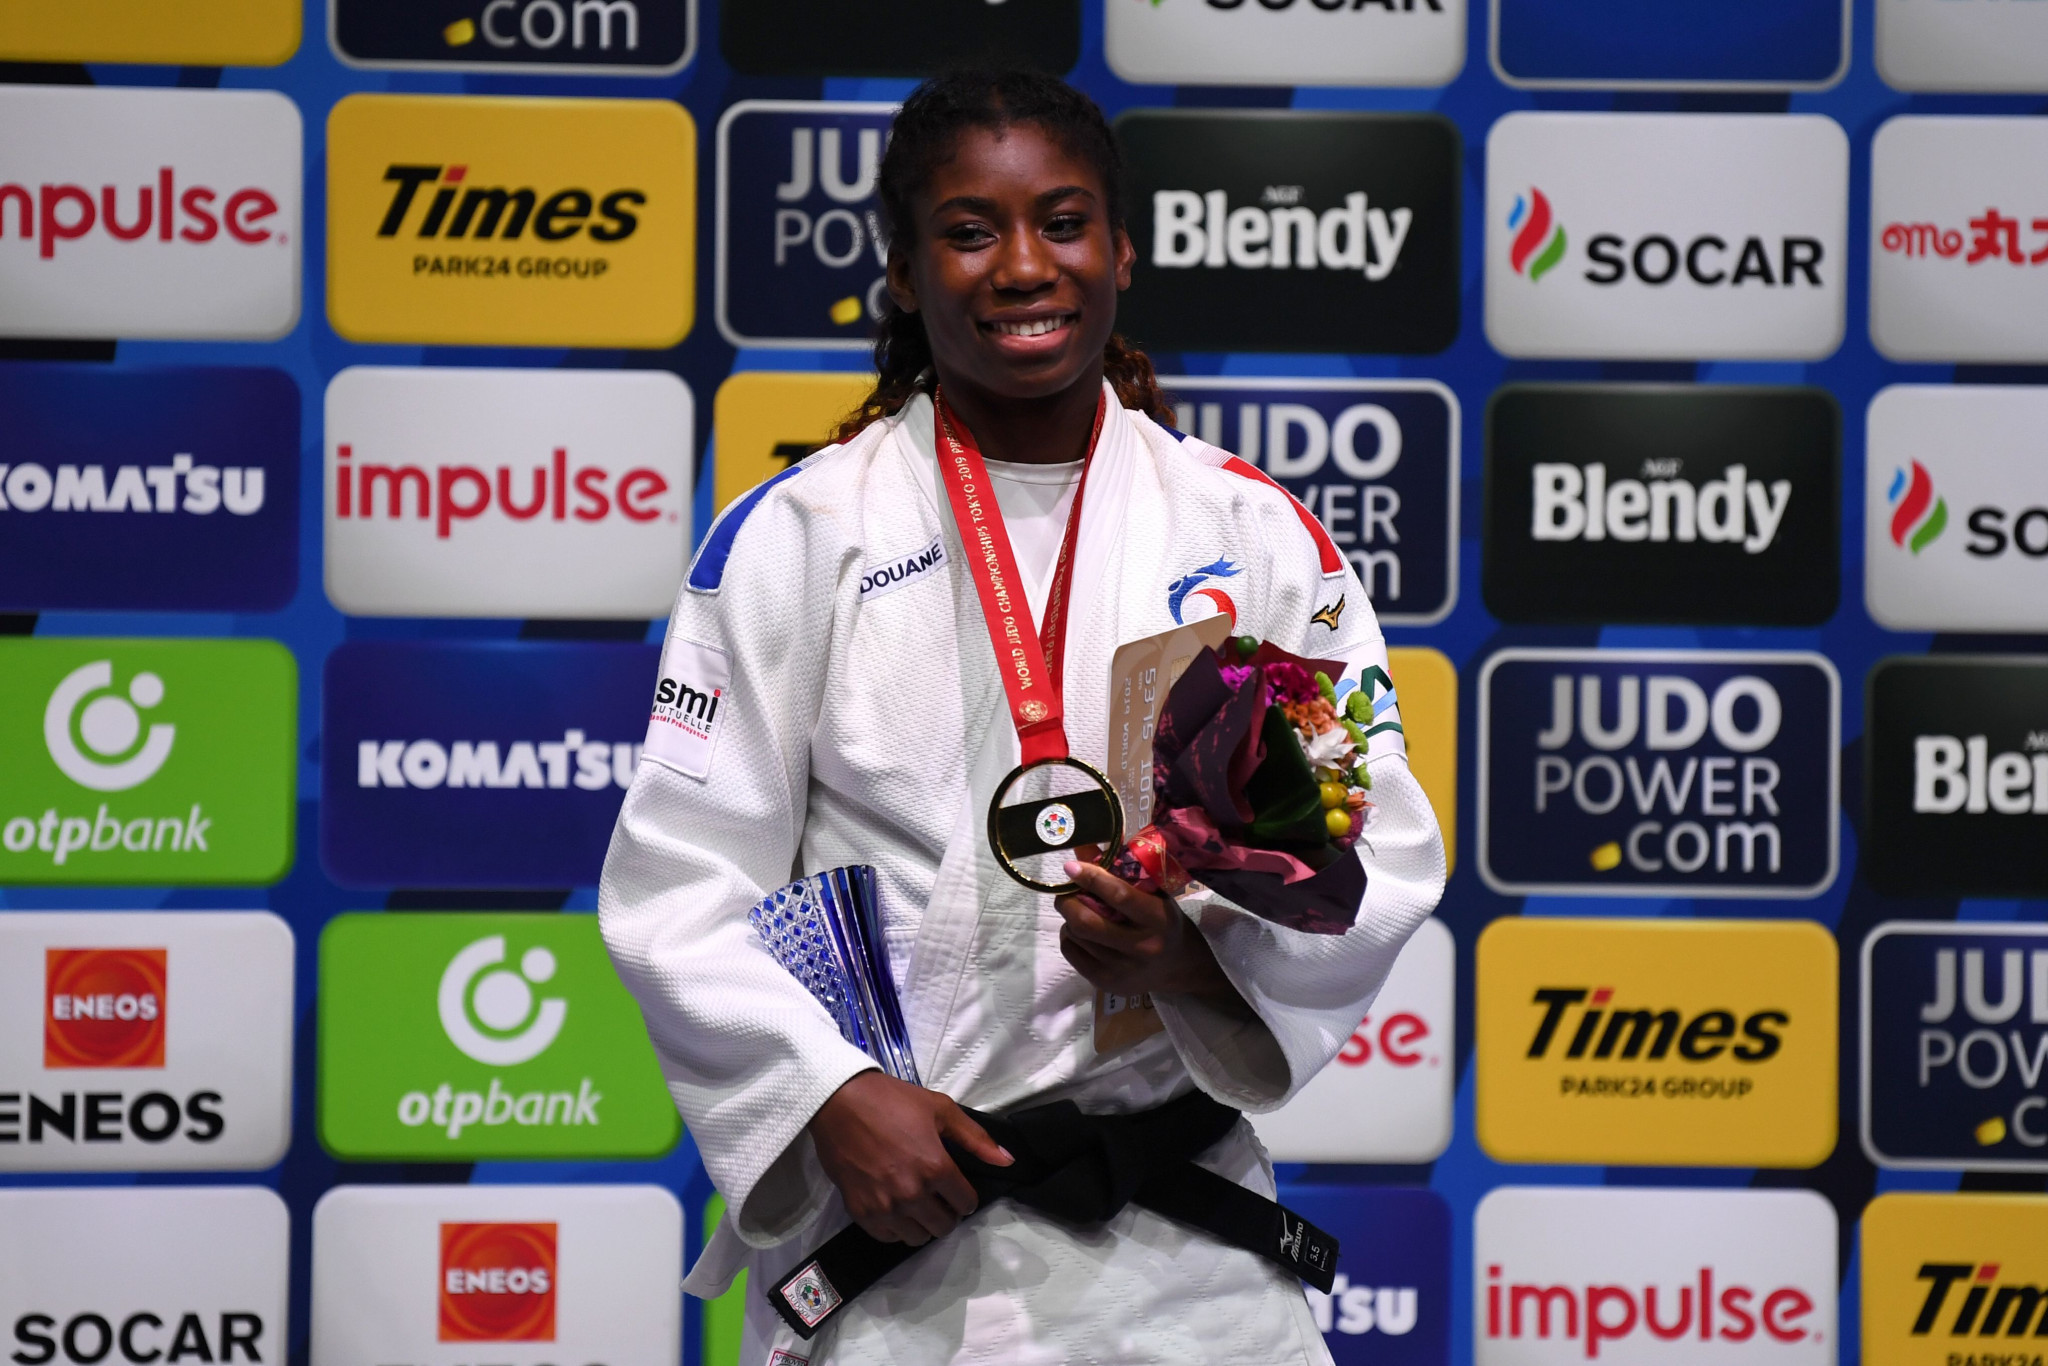 Gahié and van 't End triumph on day of upsets at IJF World Championships